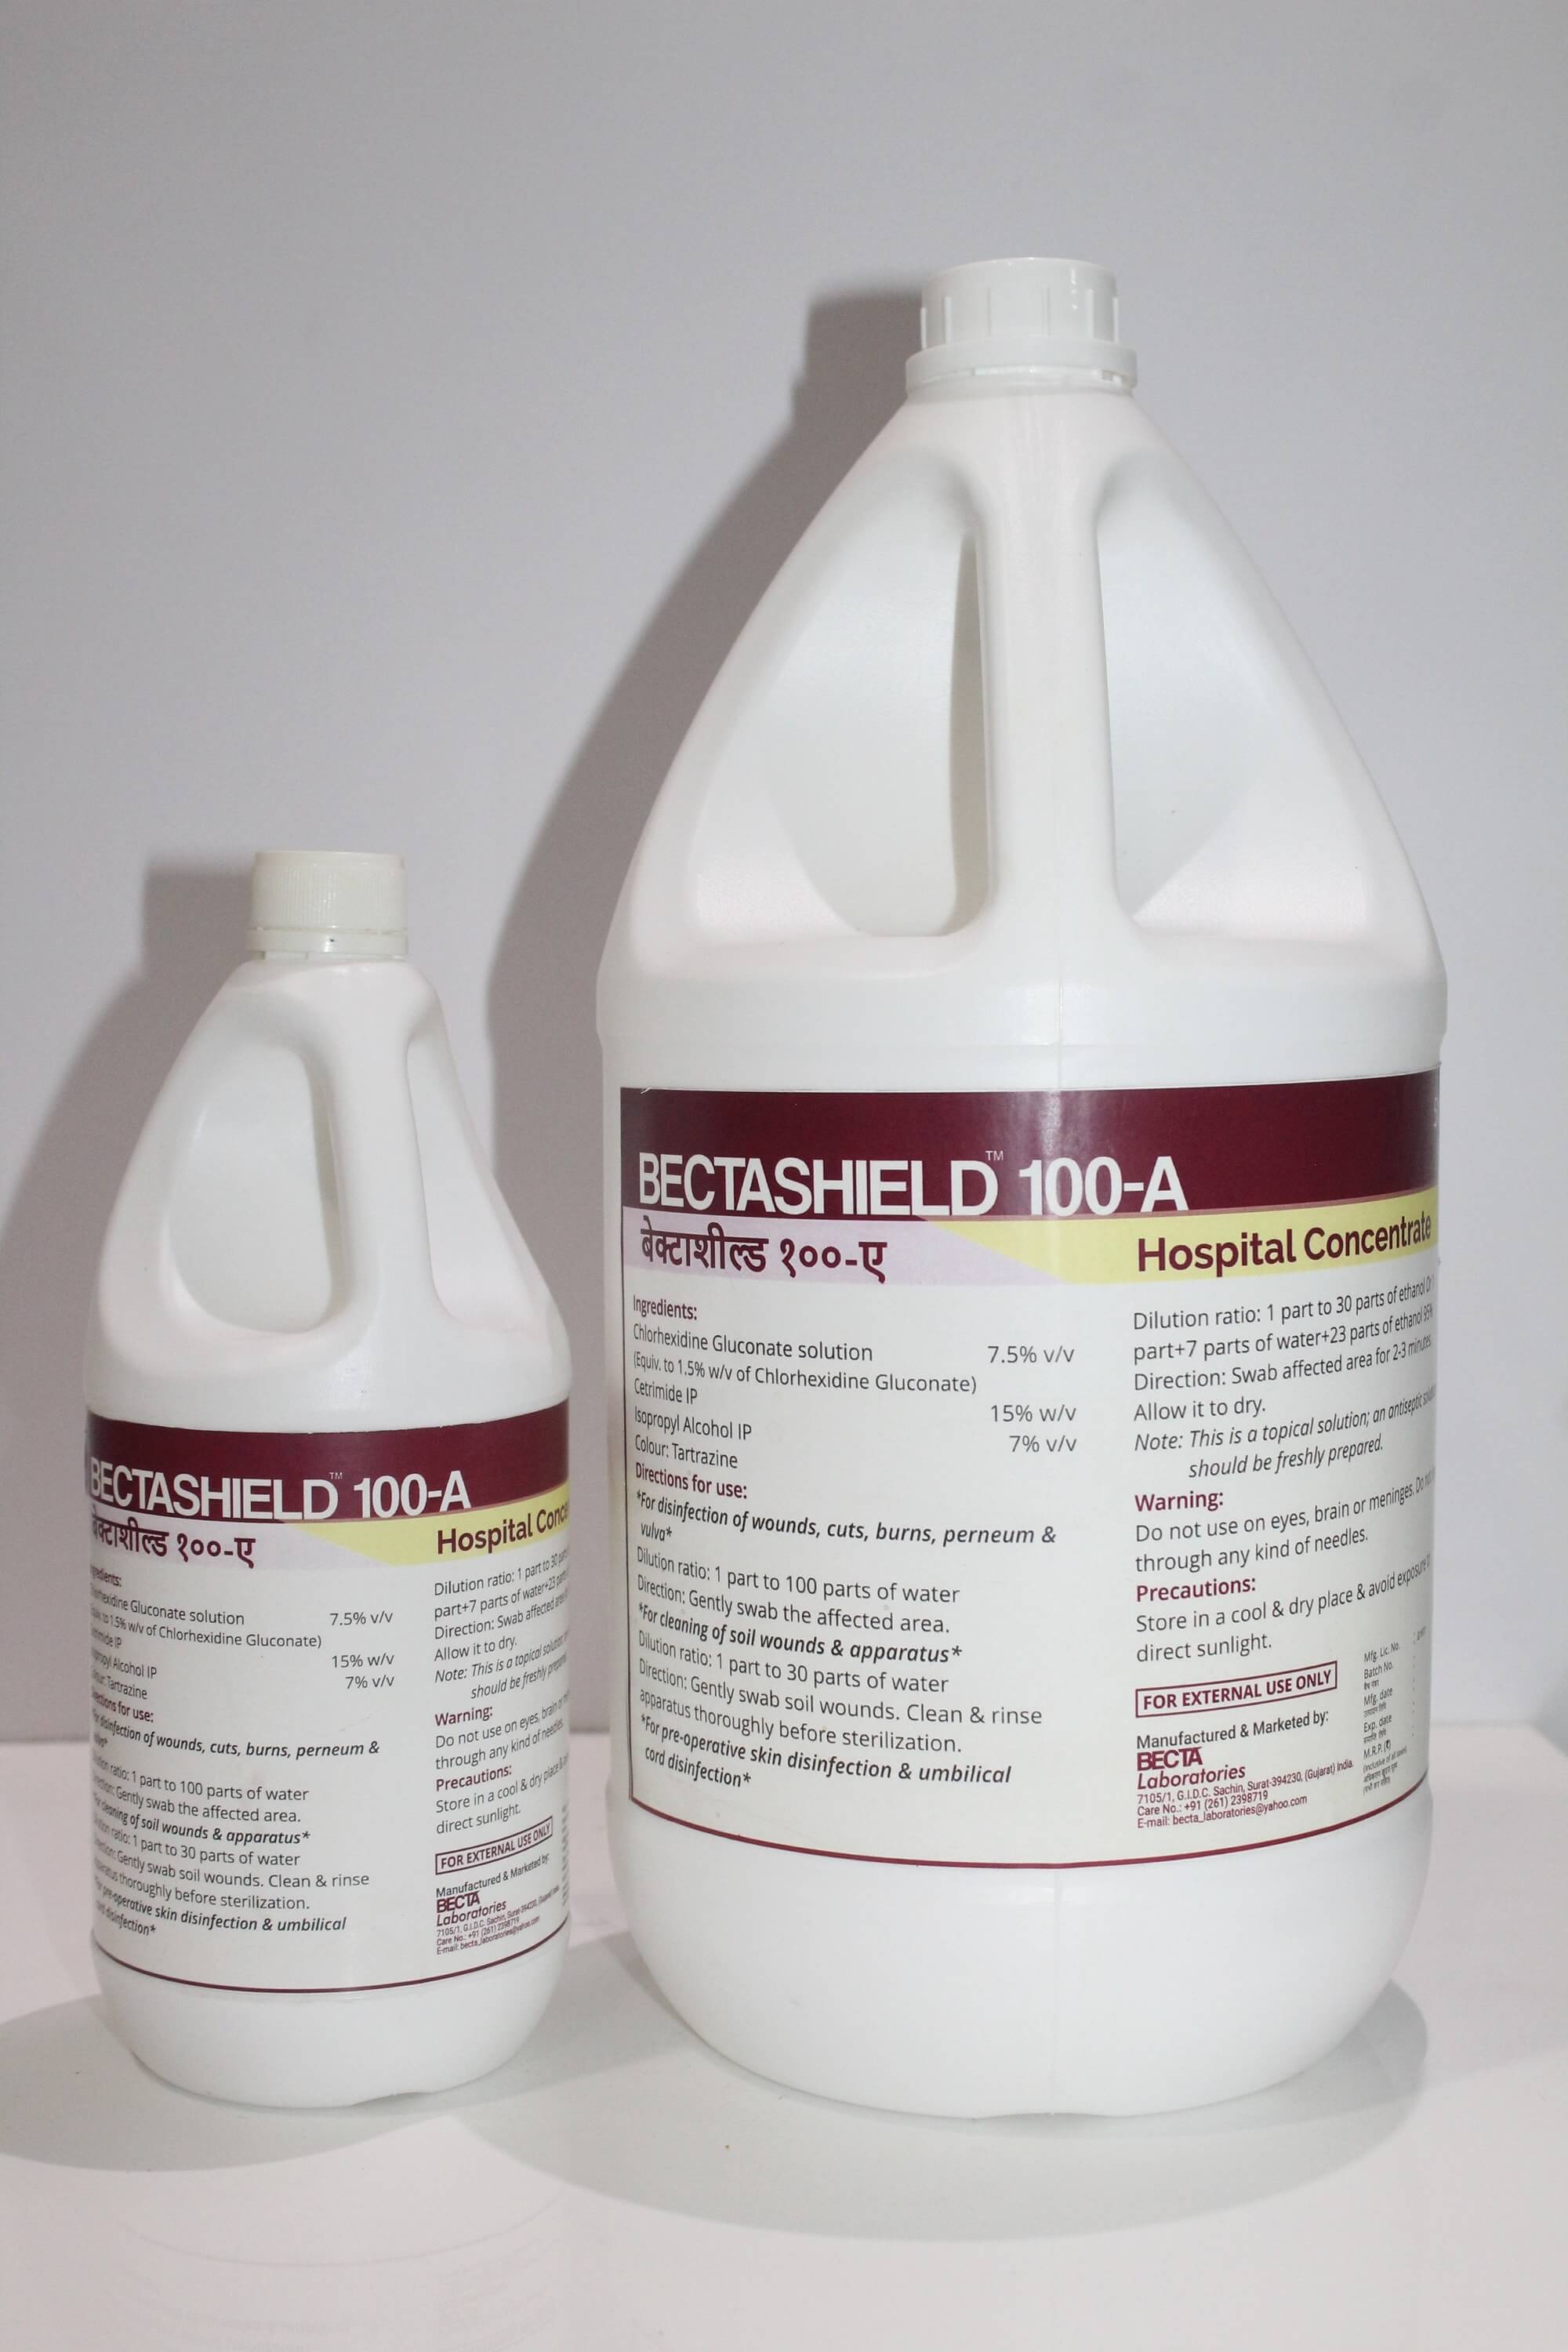 Povidone Iodine Solution Antiseptic Disinfectant Solutions Exporter Manufacturer Suppliers Becta Laboratories Surat